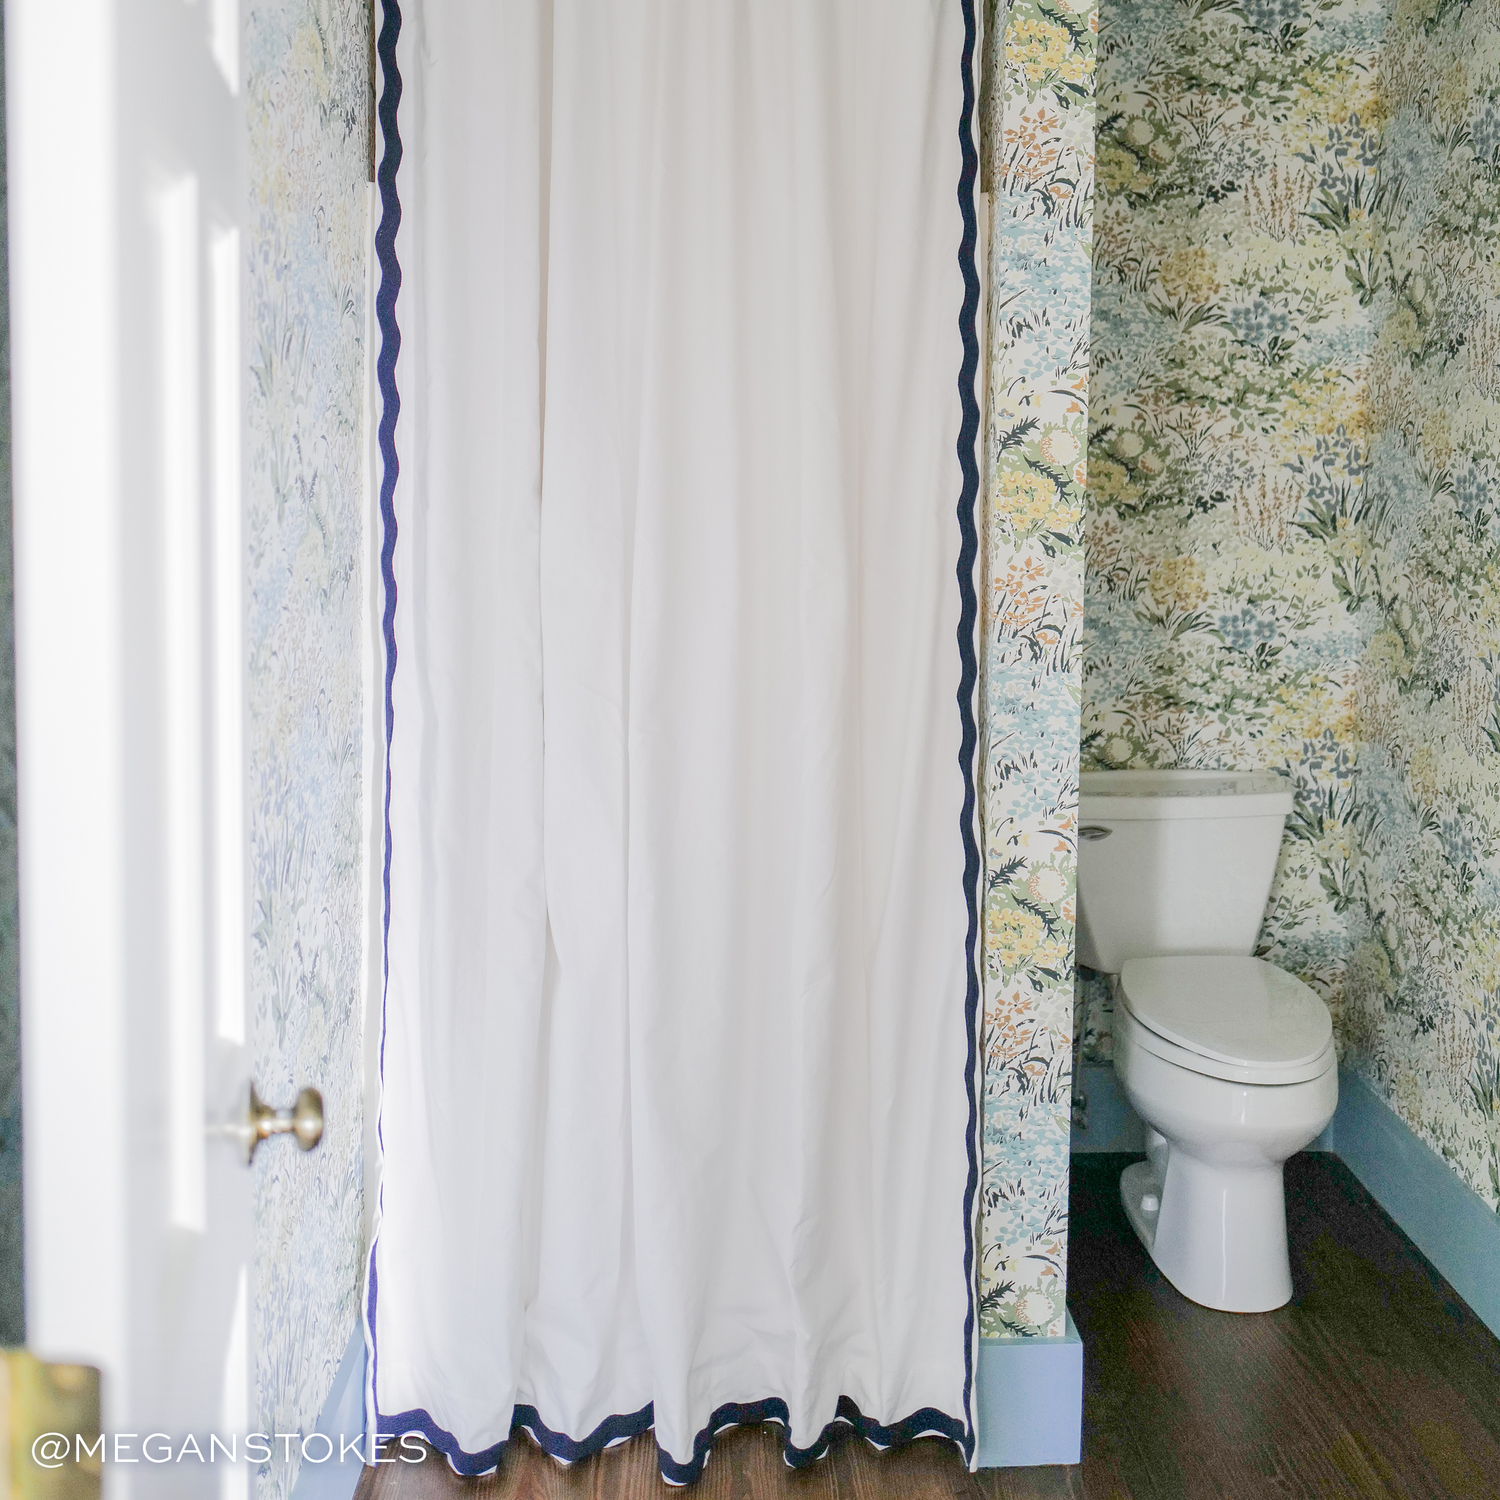 White Cotton shower curtain hanging on rod in bathroom with blue green and yellow floral wallpaper